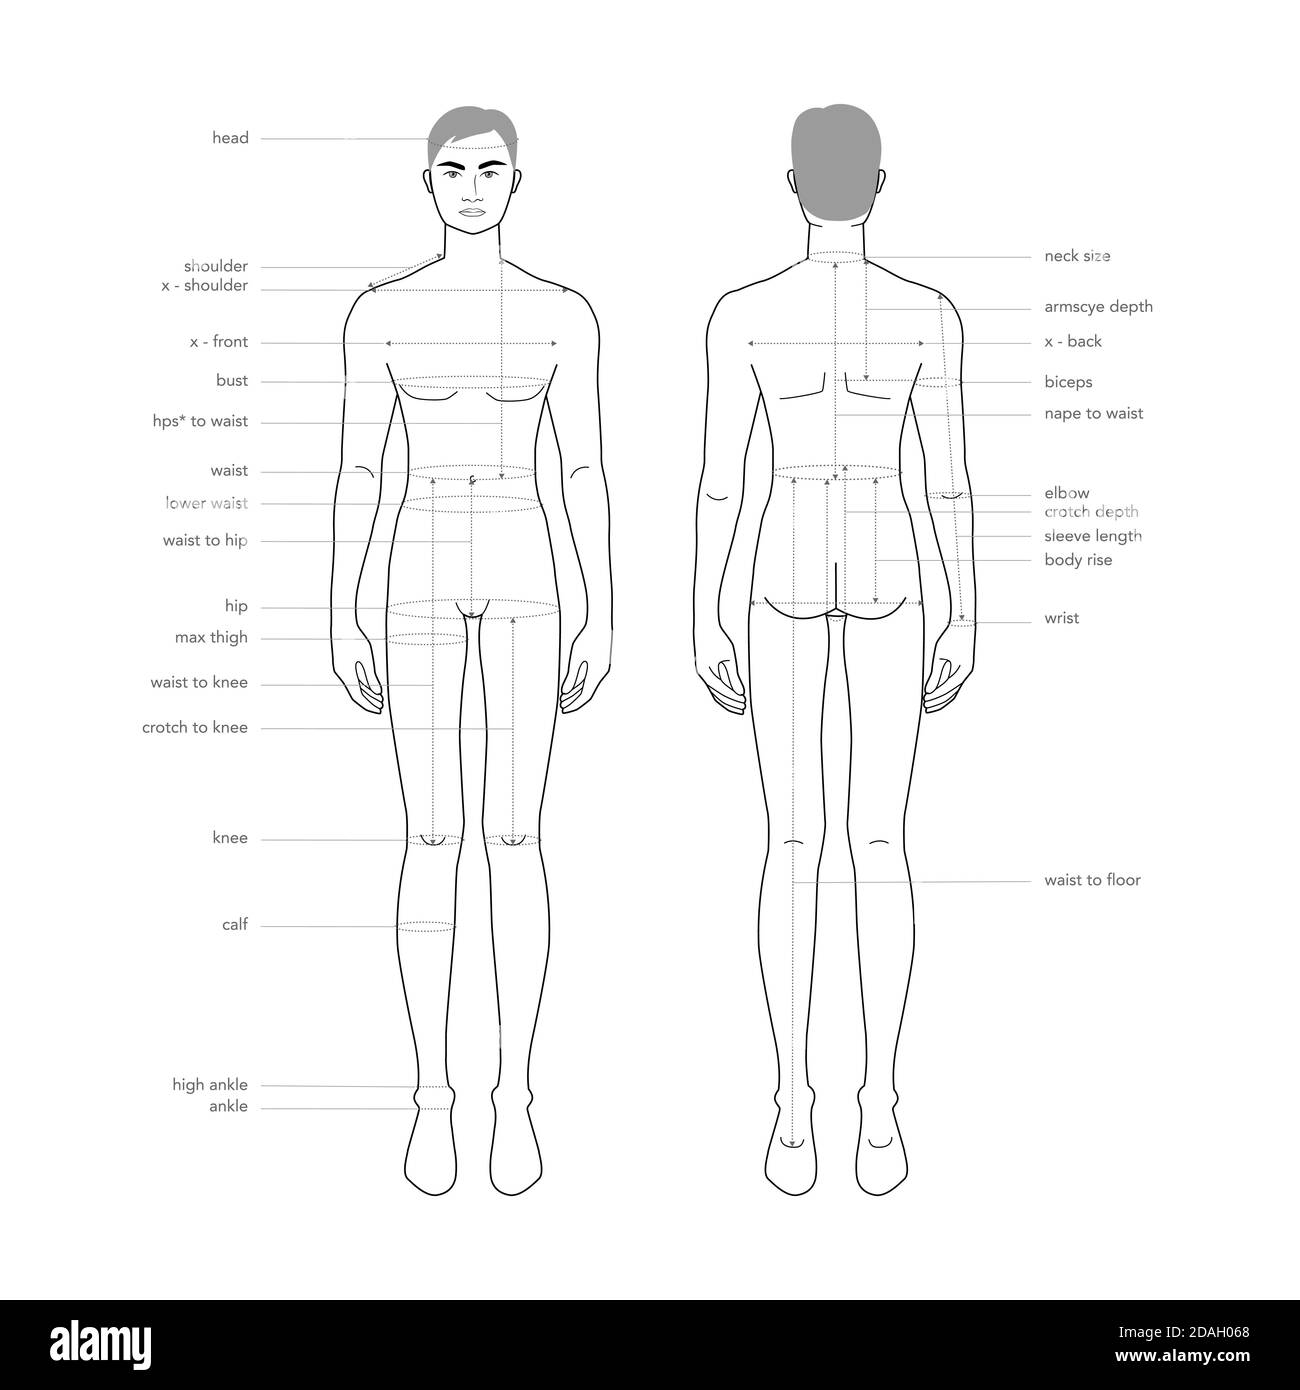 Men Body Parts Terminology Measurements Illustration For Clothes And Accessories Production Fashion Male Size Chart 9 Head Boy For Site And Online Shop Human Body Infographic Template Stock Vector Image Art